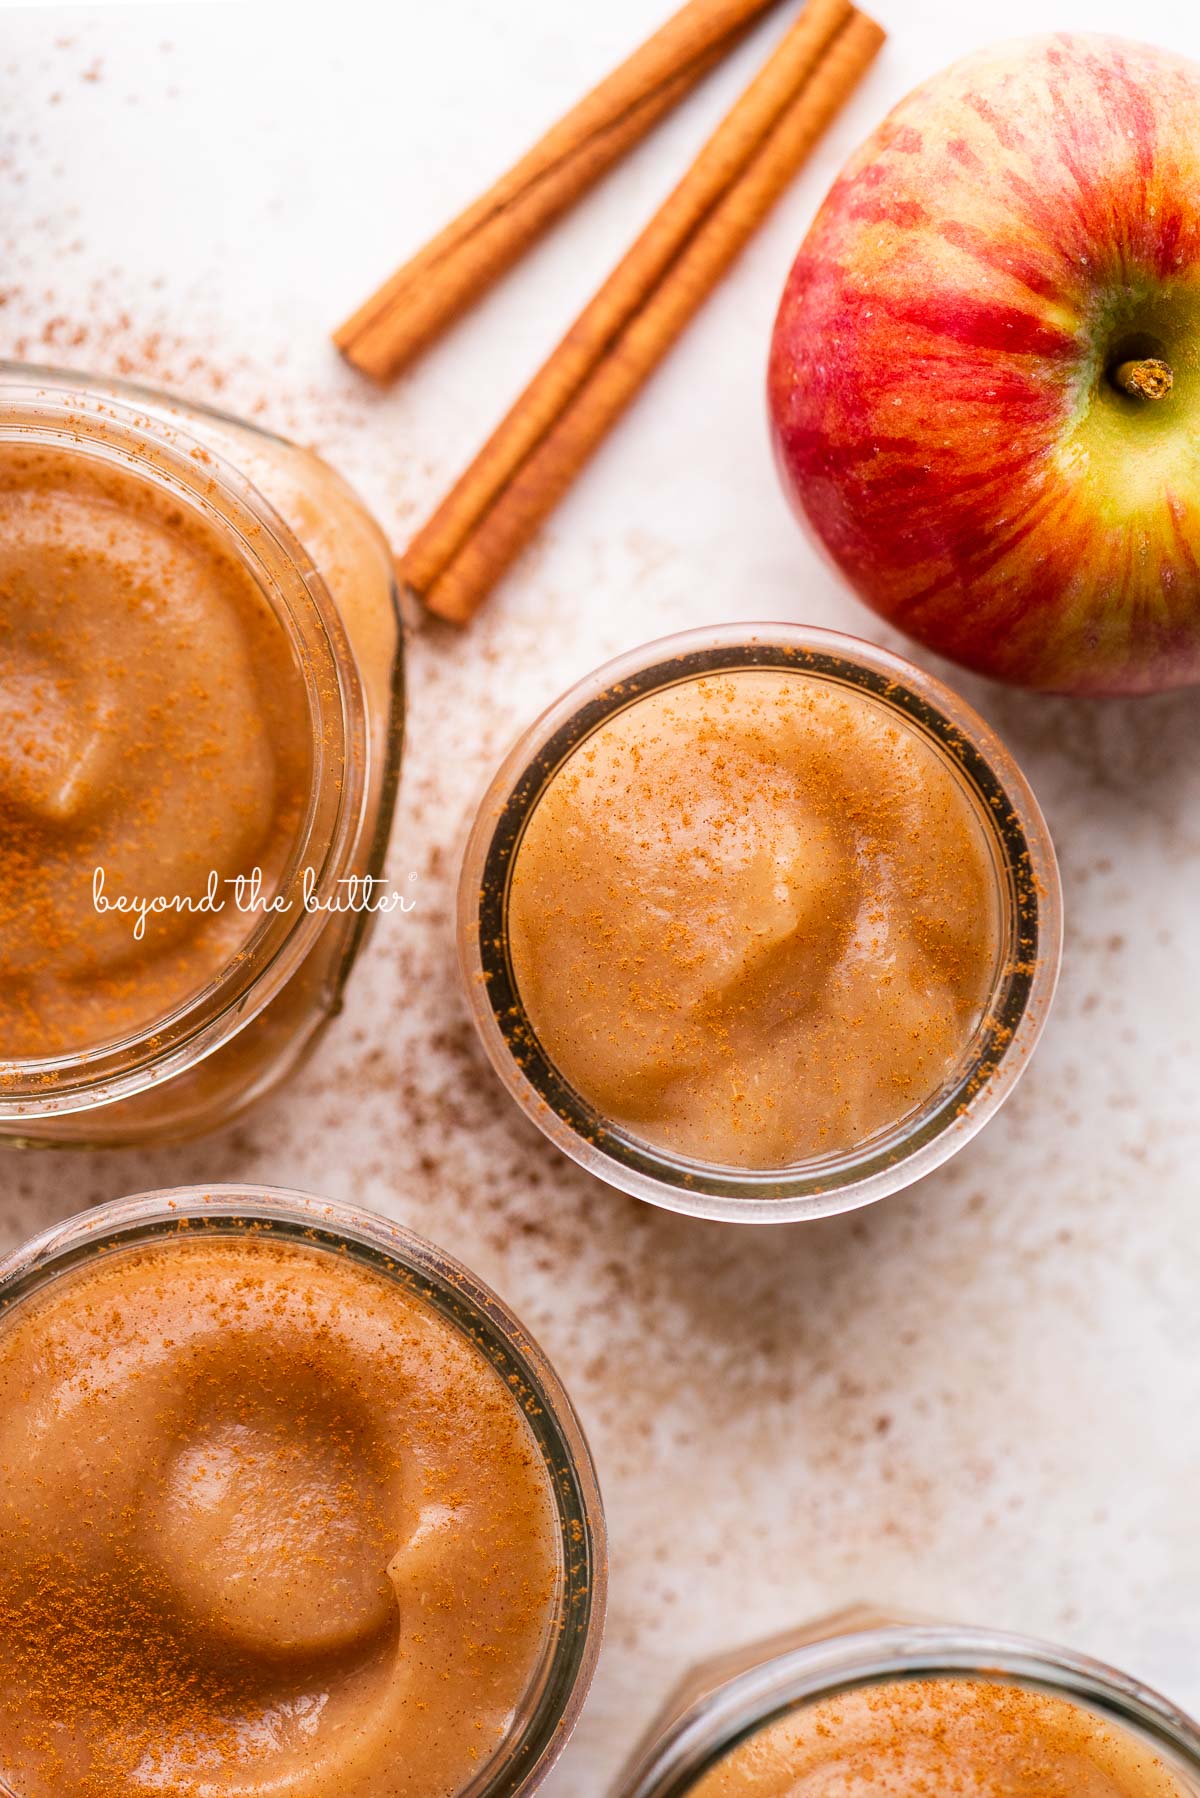 Jars of no sugar added applesauce with cinnamon sticks and apples | © Beyond the Butter®